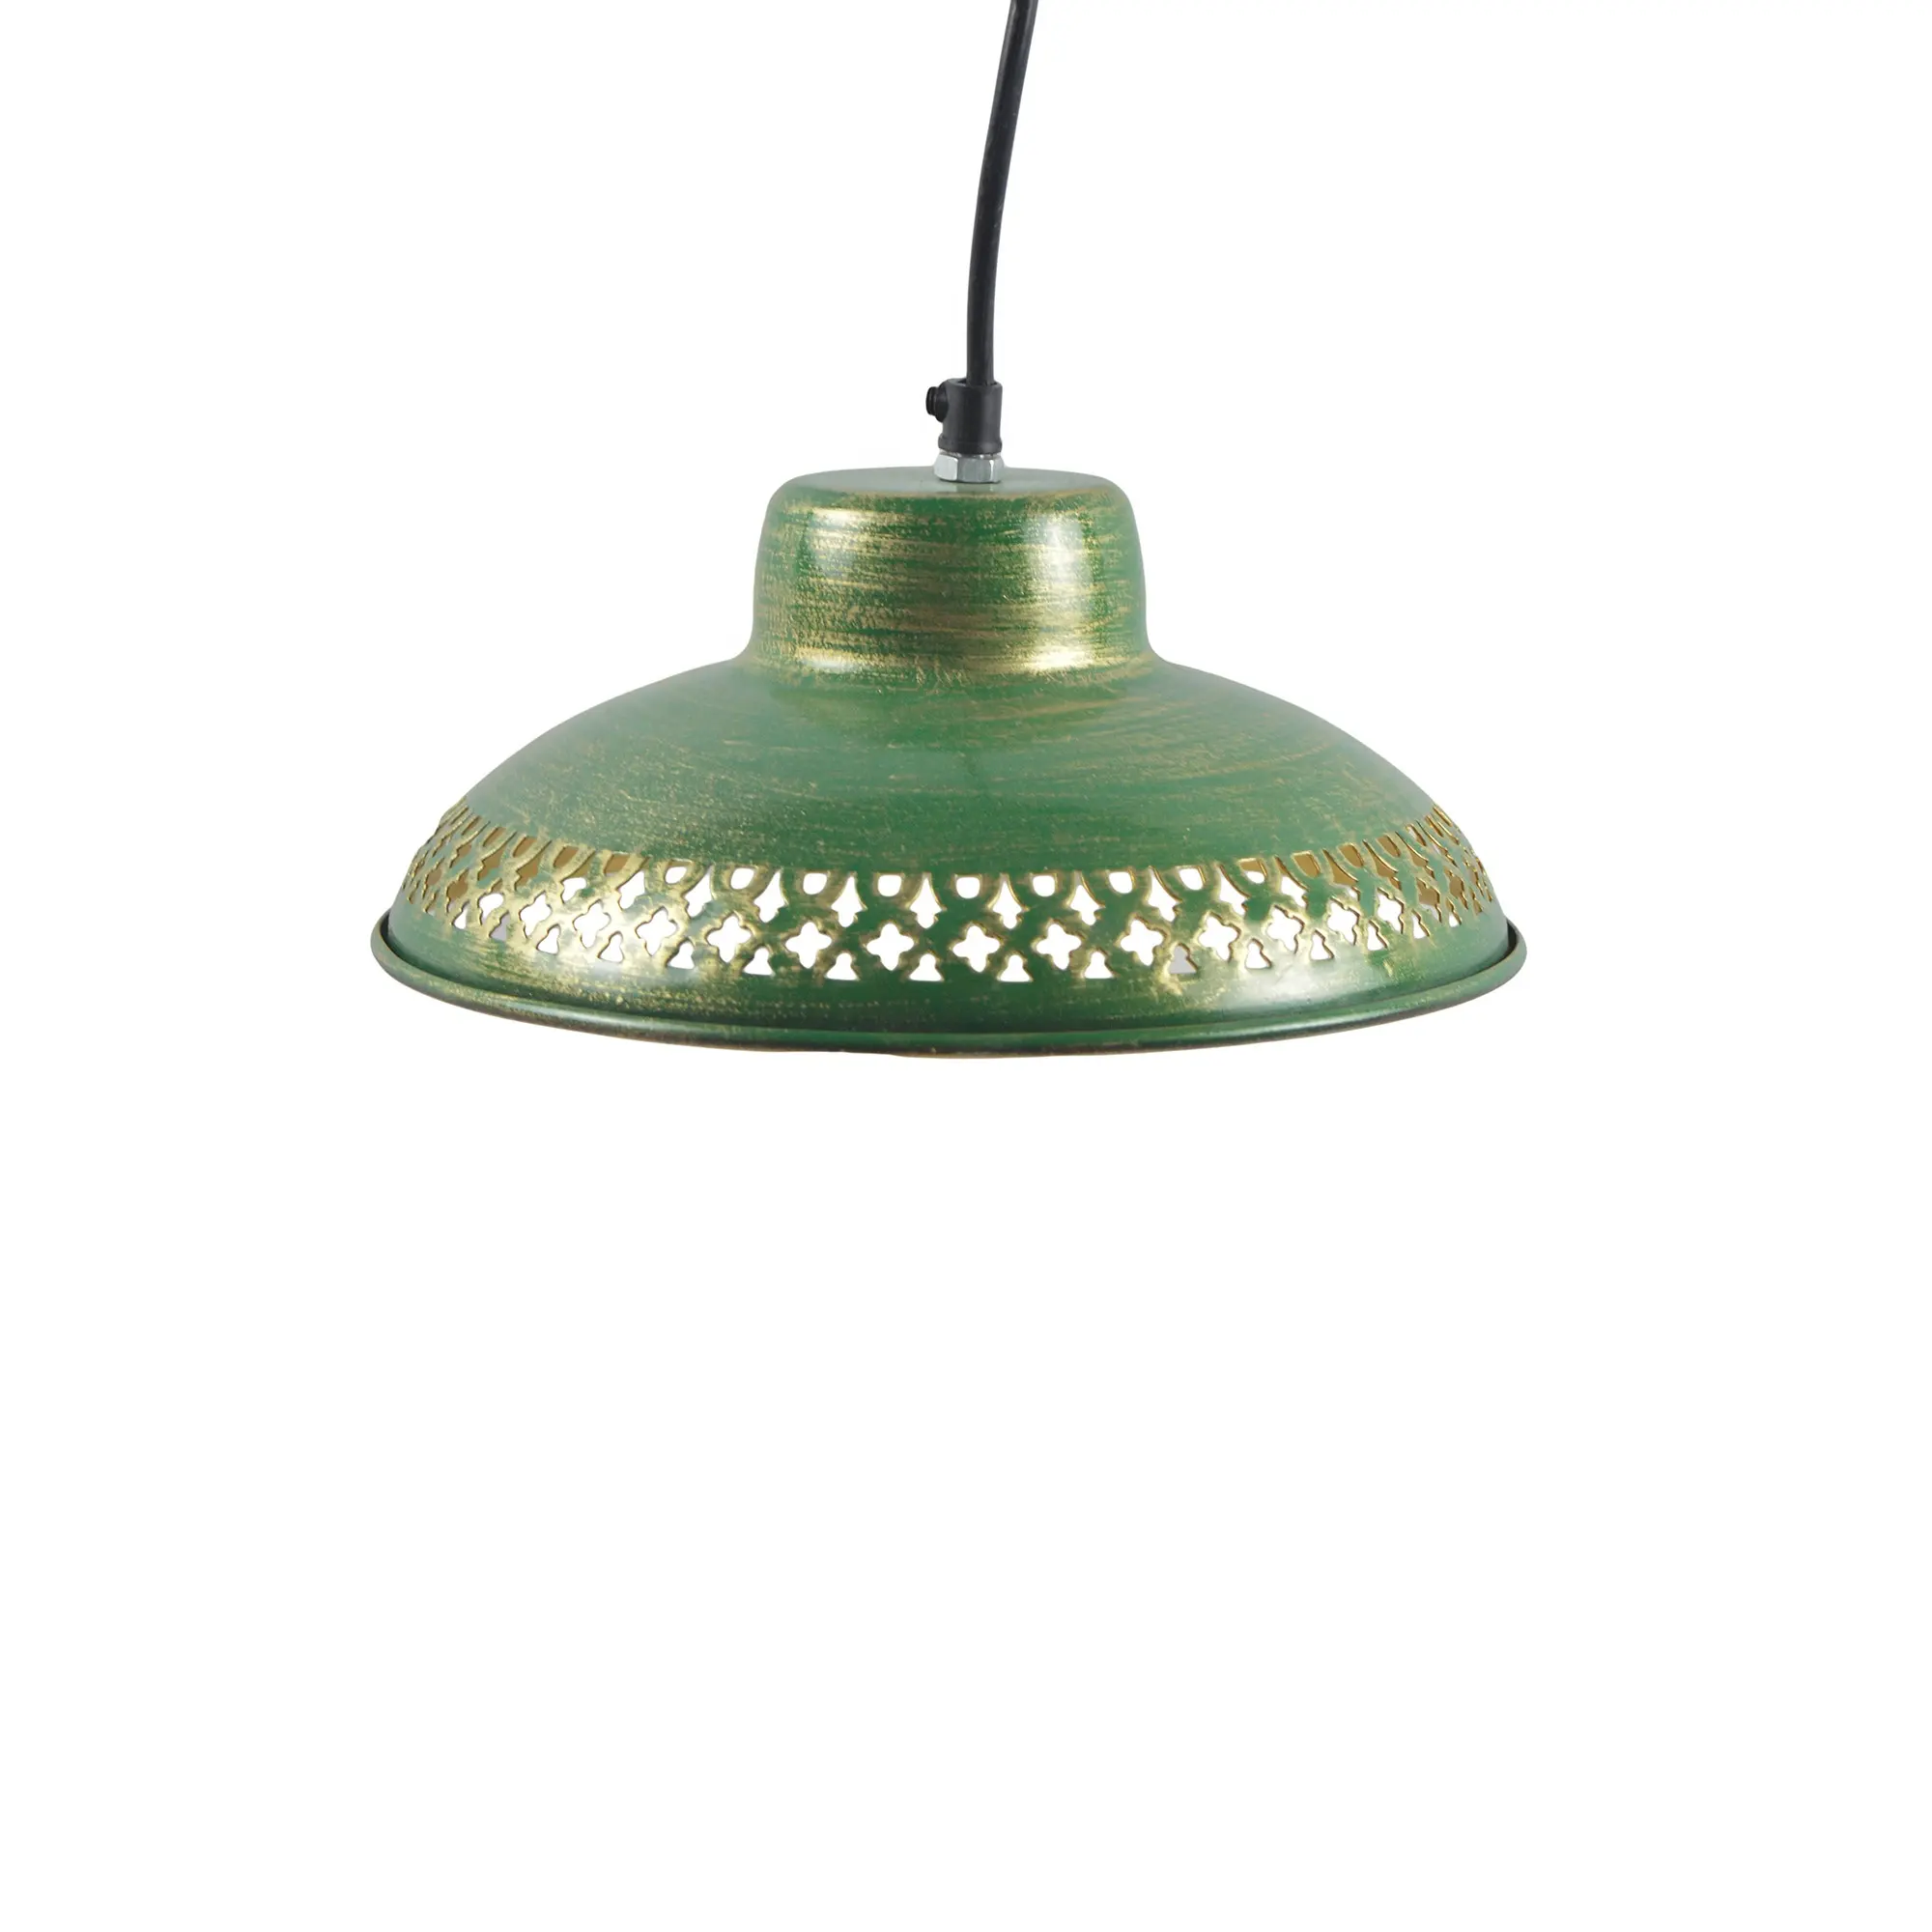 Casting Design Lamp With Green And Golden Combo Colored Painted Finishing And Solid Metal Hanging Lamp